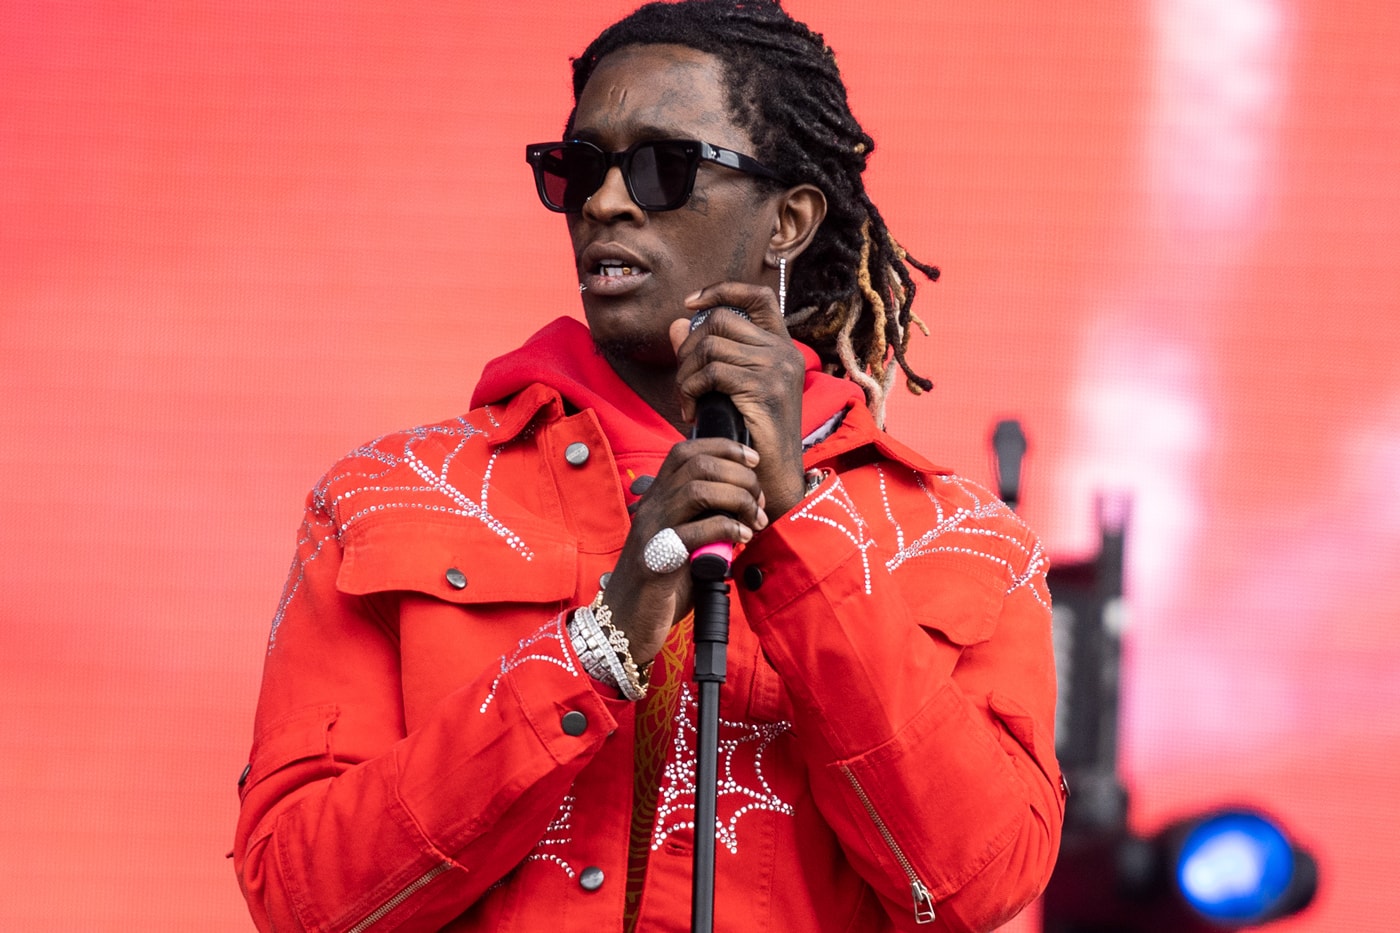 young thug arrested slime language dave & buster's music 2018 august